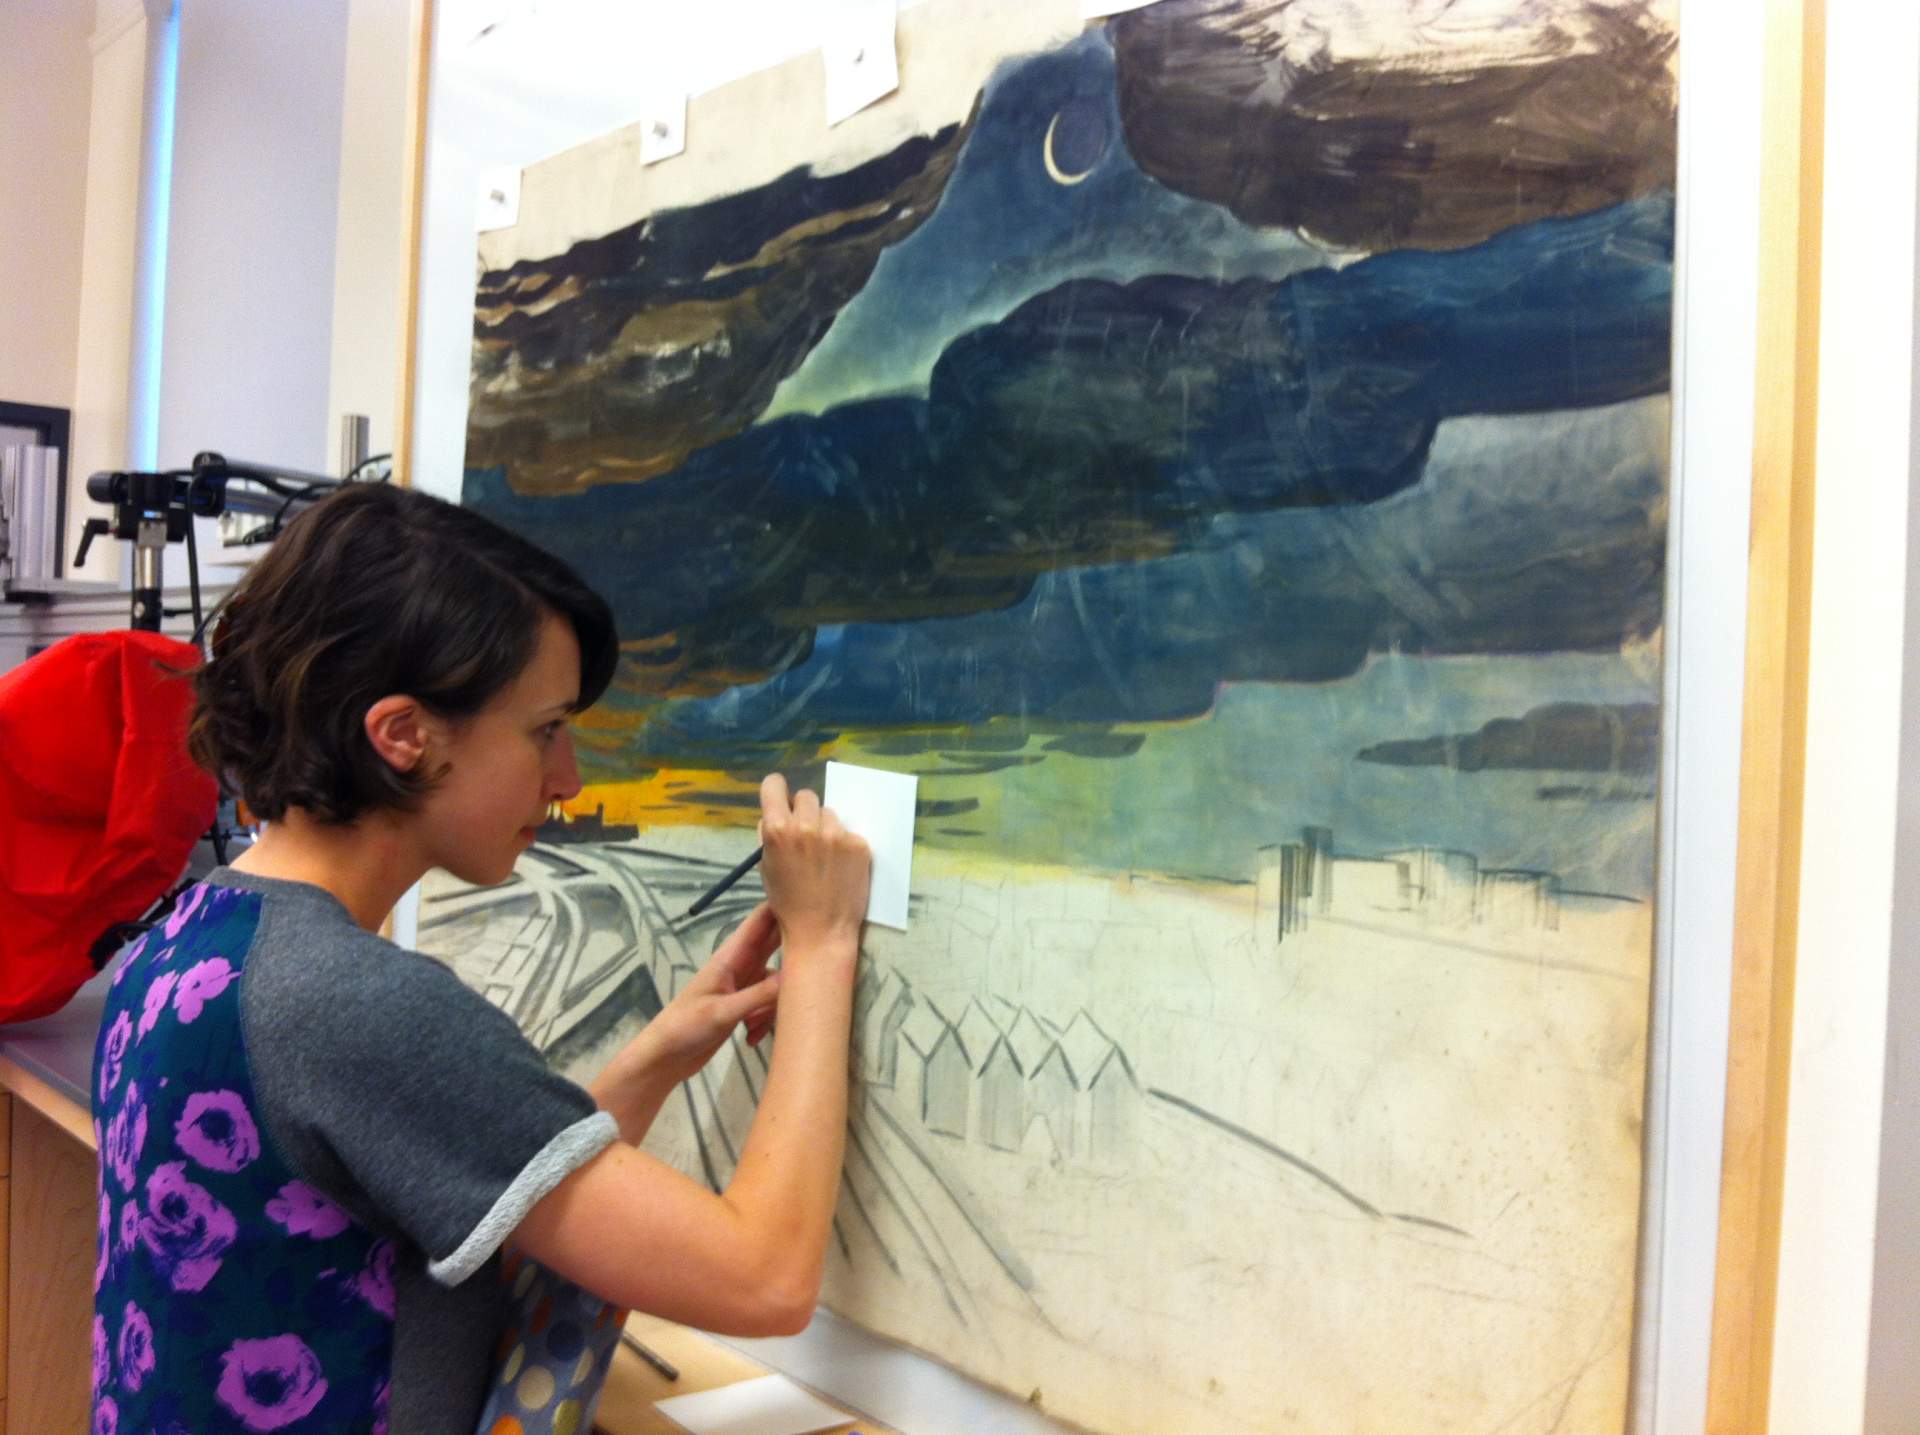 Christina Taylor working on New Moon #10 by Charles E. Burchfield in the Art Conservation Department